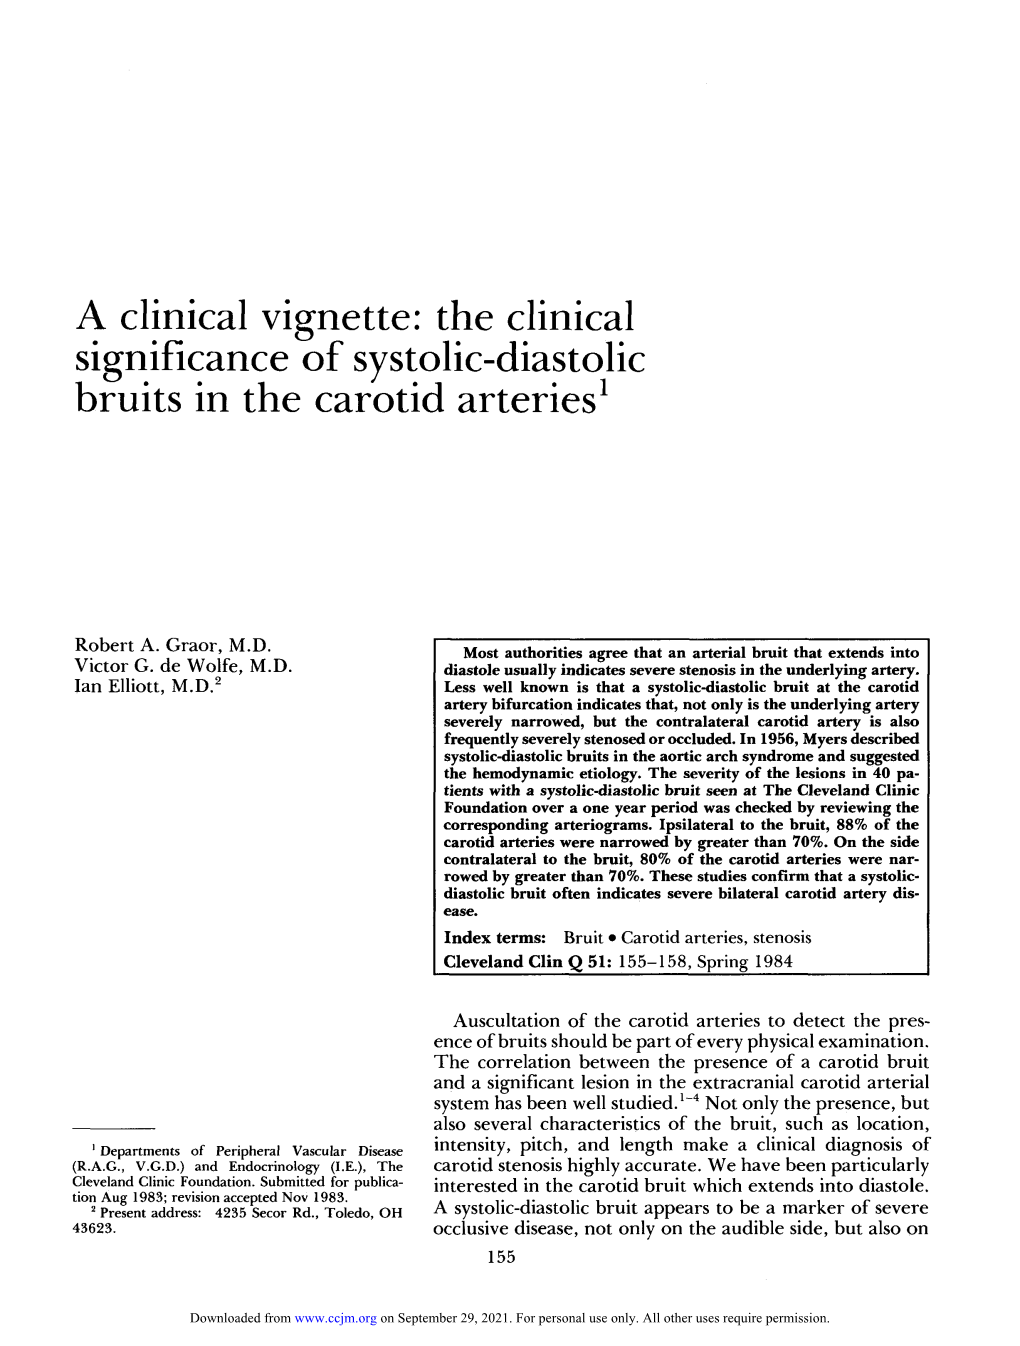 The Clinical Significance of Systolic-Diastolic Bruits in the Carotid Arteries1